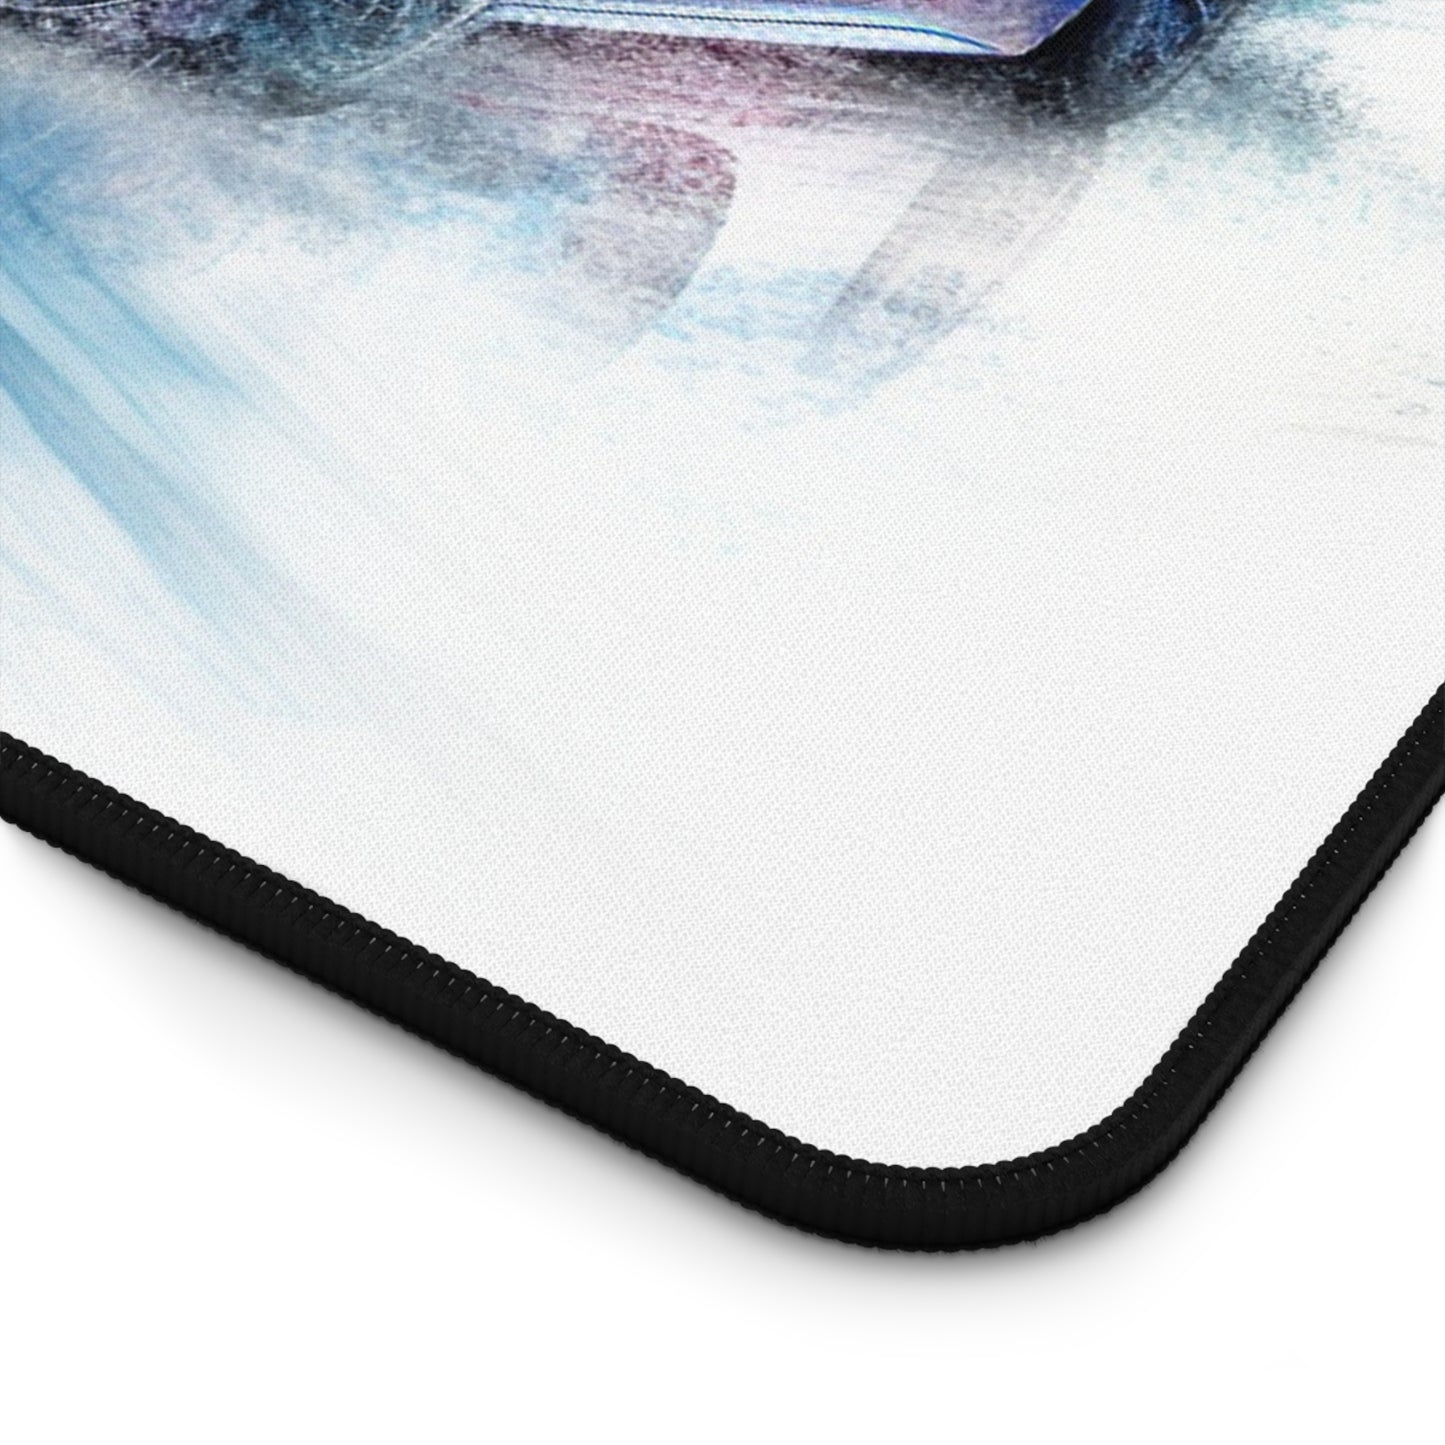 Desk Mat 918 Spyder with white background driving fast on water 1